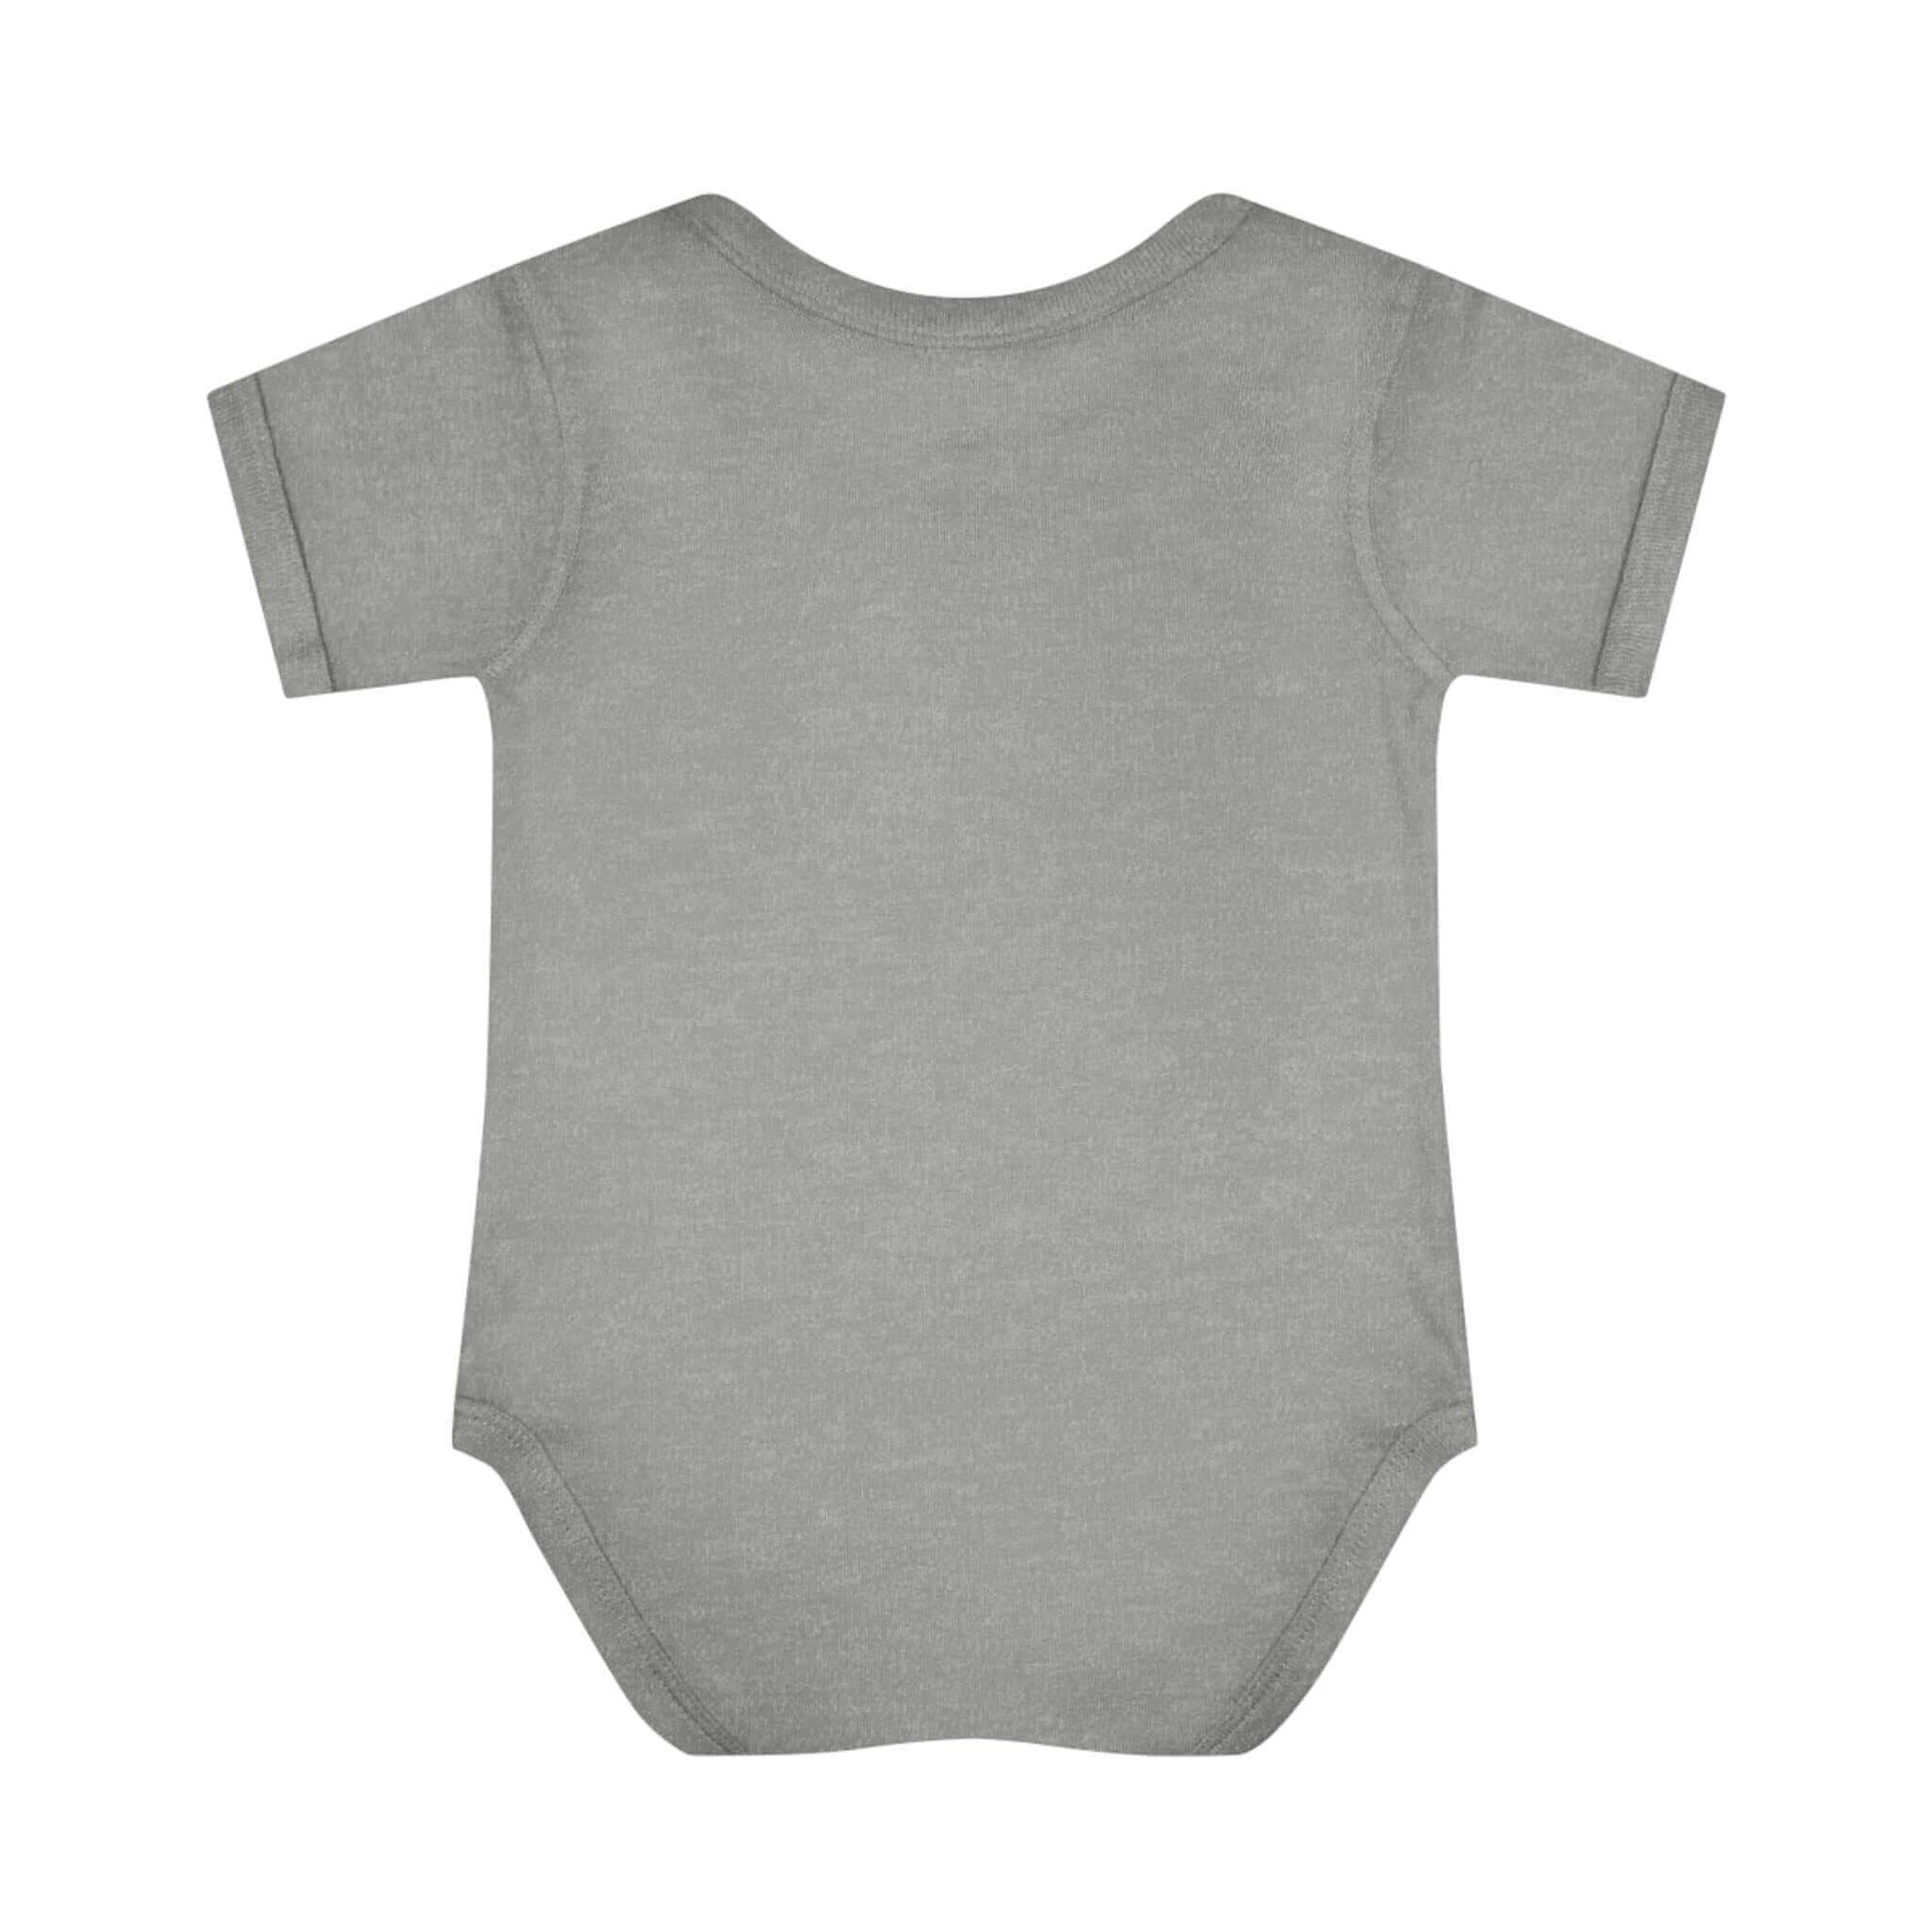 Baby bottle, Baby Clothing, Baby girl, Bodysuits, Bottle time, Cotton, Cute baby clothing, DTG, Funny baby gift, Funny baby onesie, Funnyonesie, Kids' Clothing, Neck Labels, Onesies, Regular fit